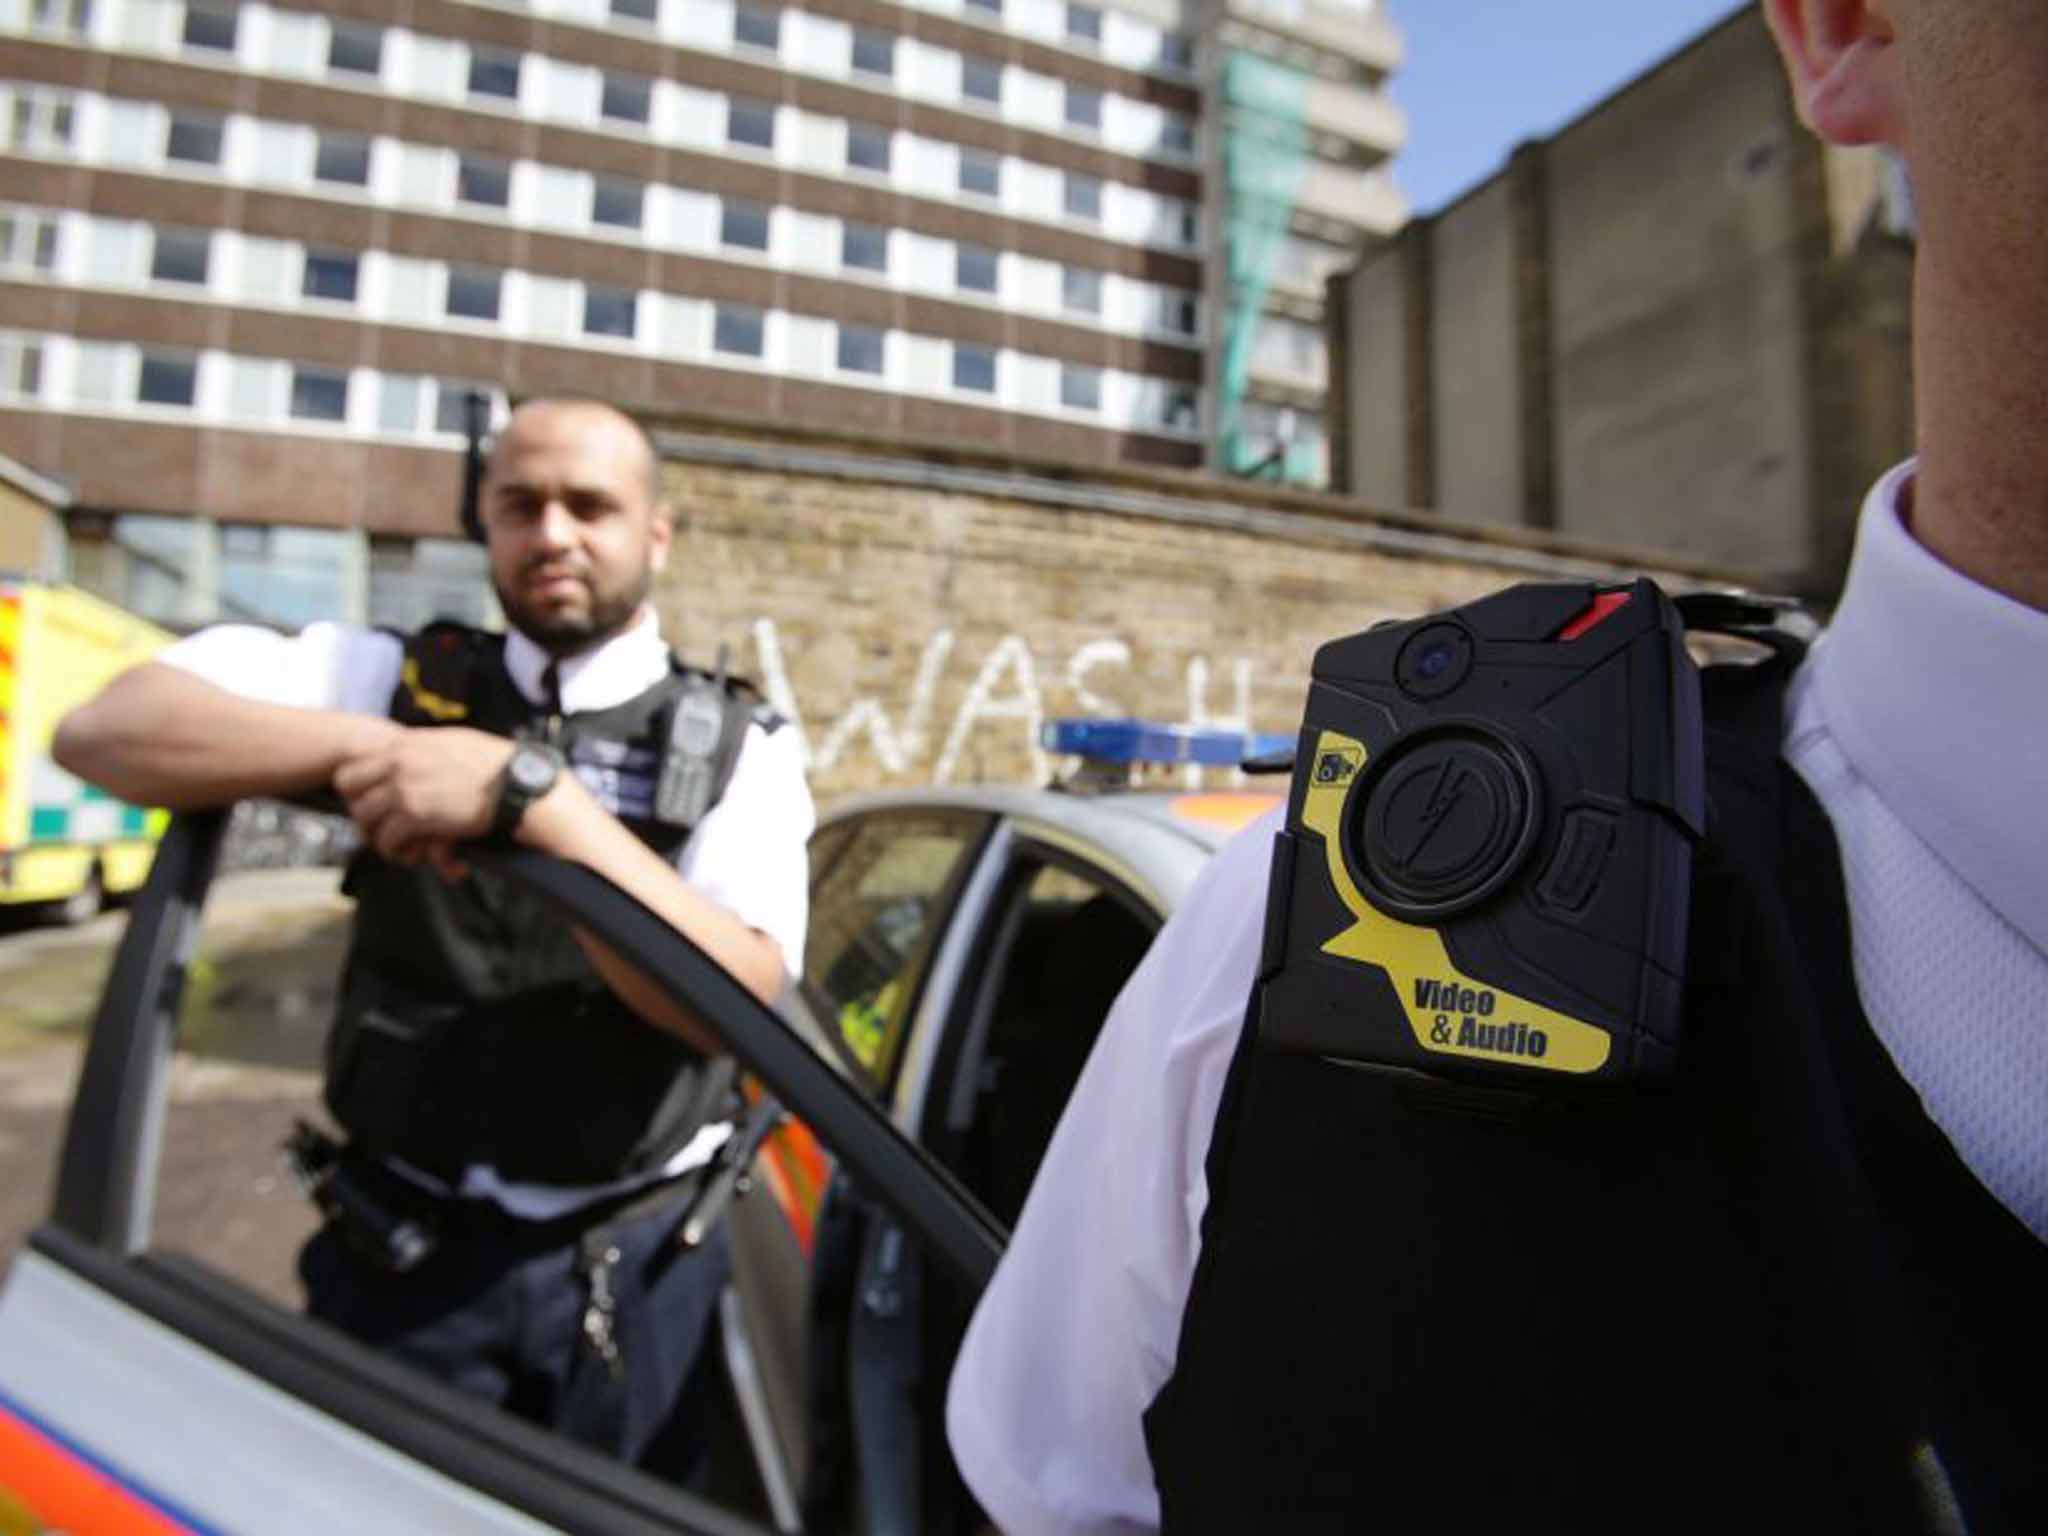 Watching the watchmen: Metropolitan Police Constable Yasa Amerat and a colleague show off body-worn video (BWV) cameras